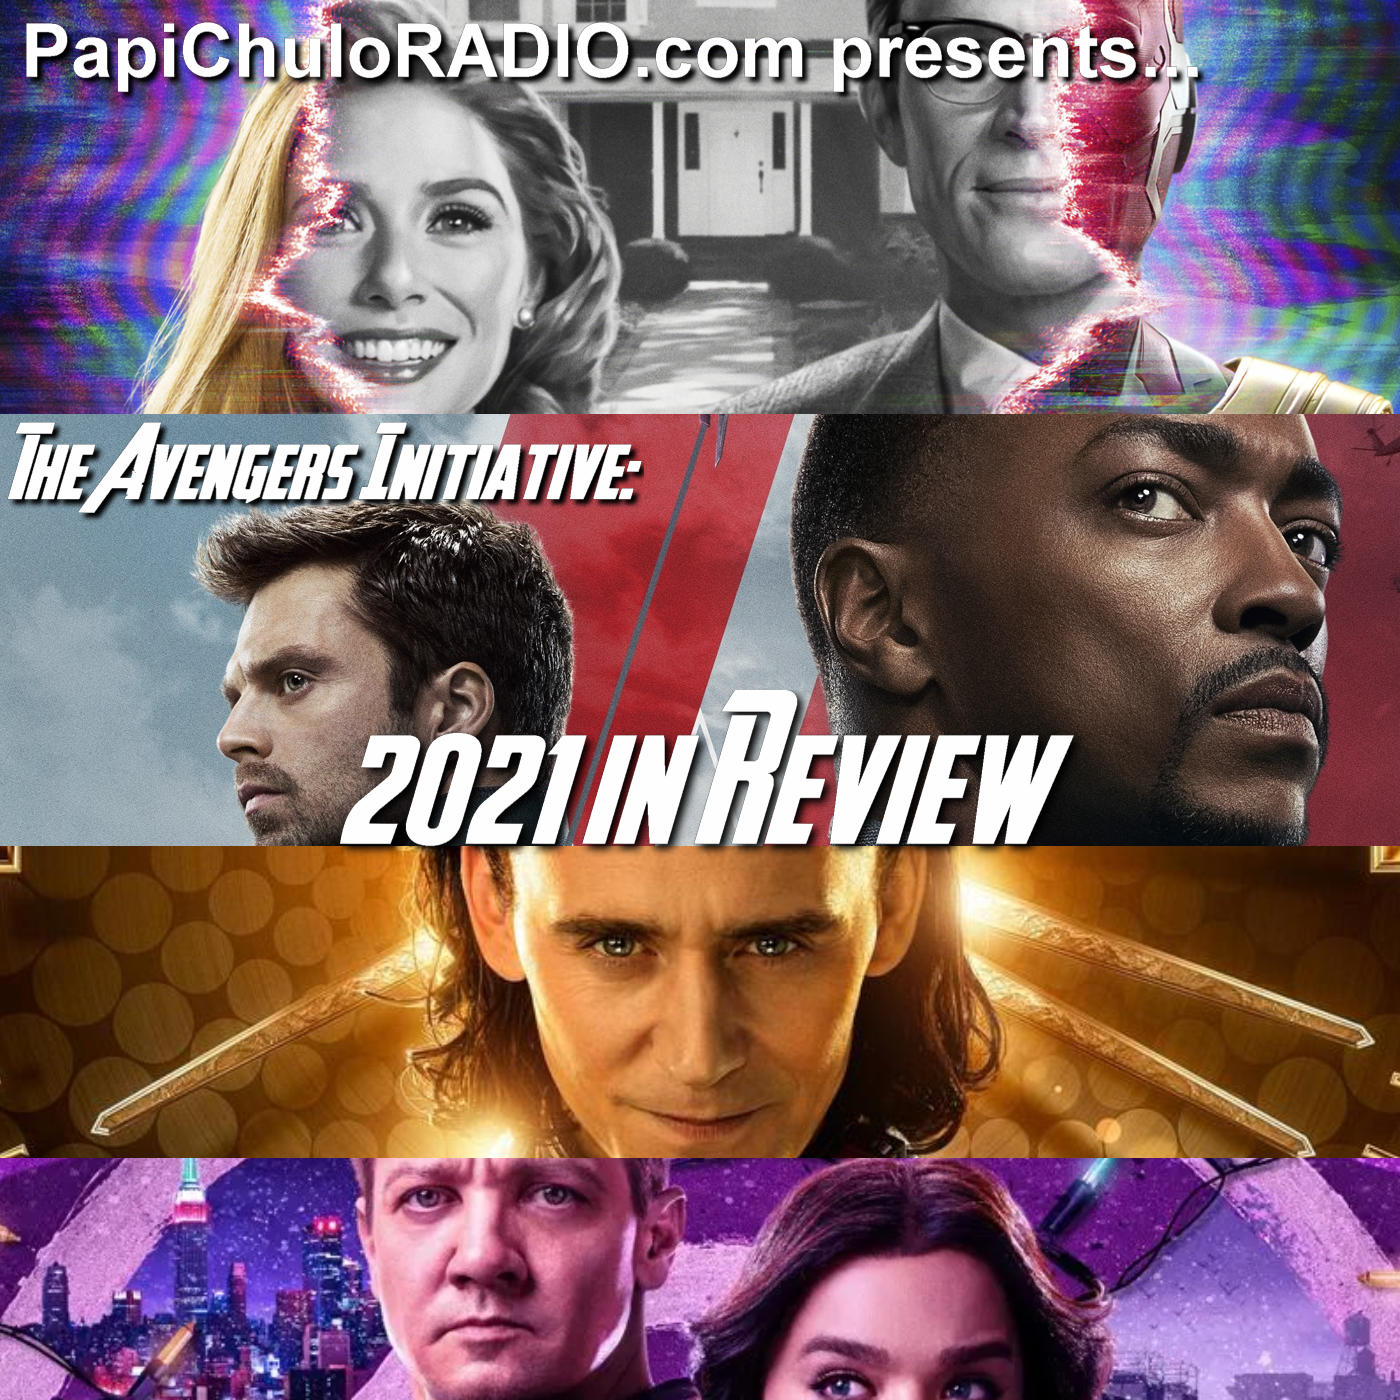 2021 in Review – The Avengers Initiative [December 28, 2021]